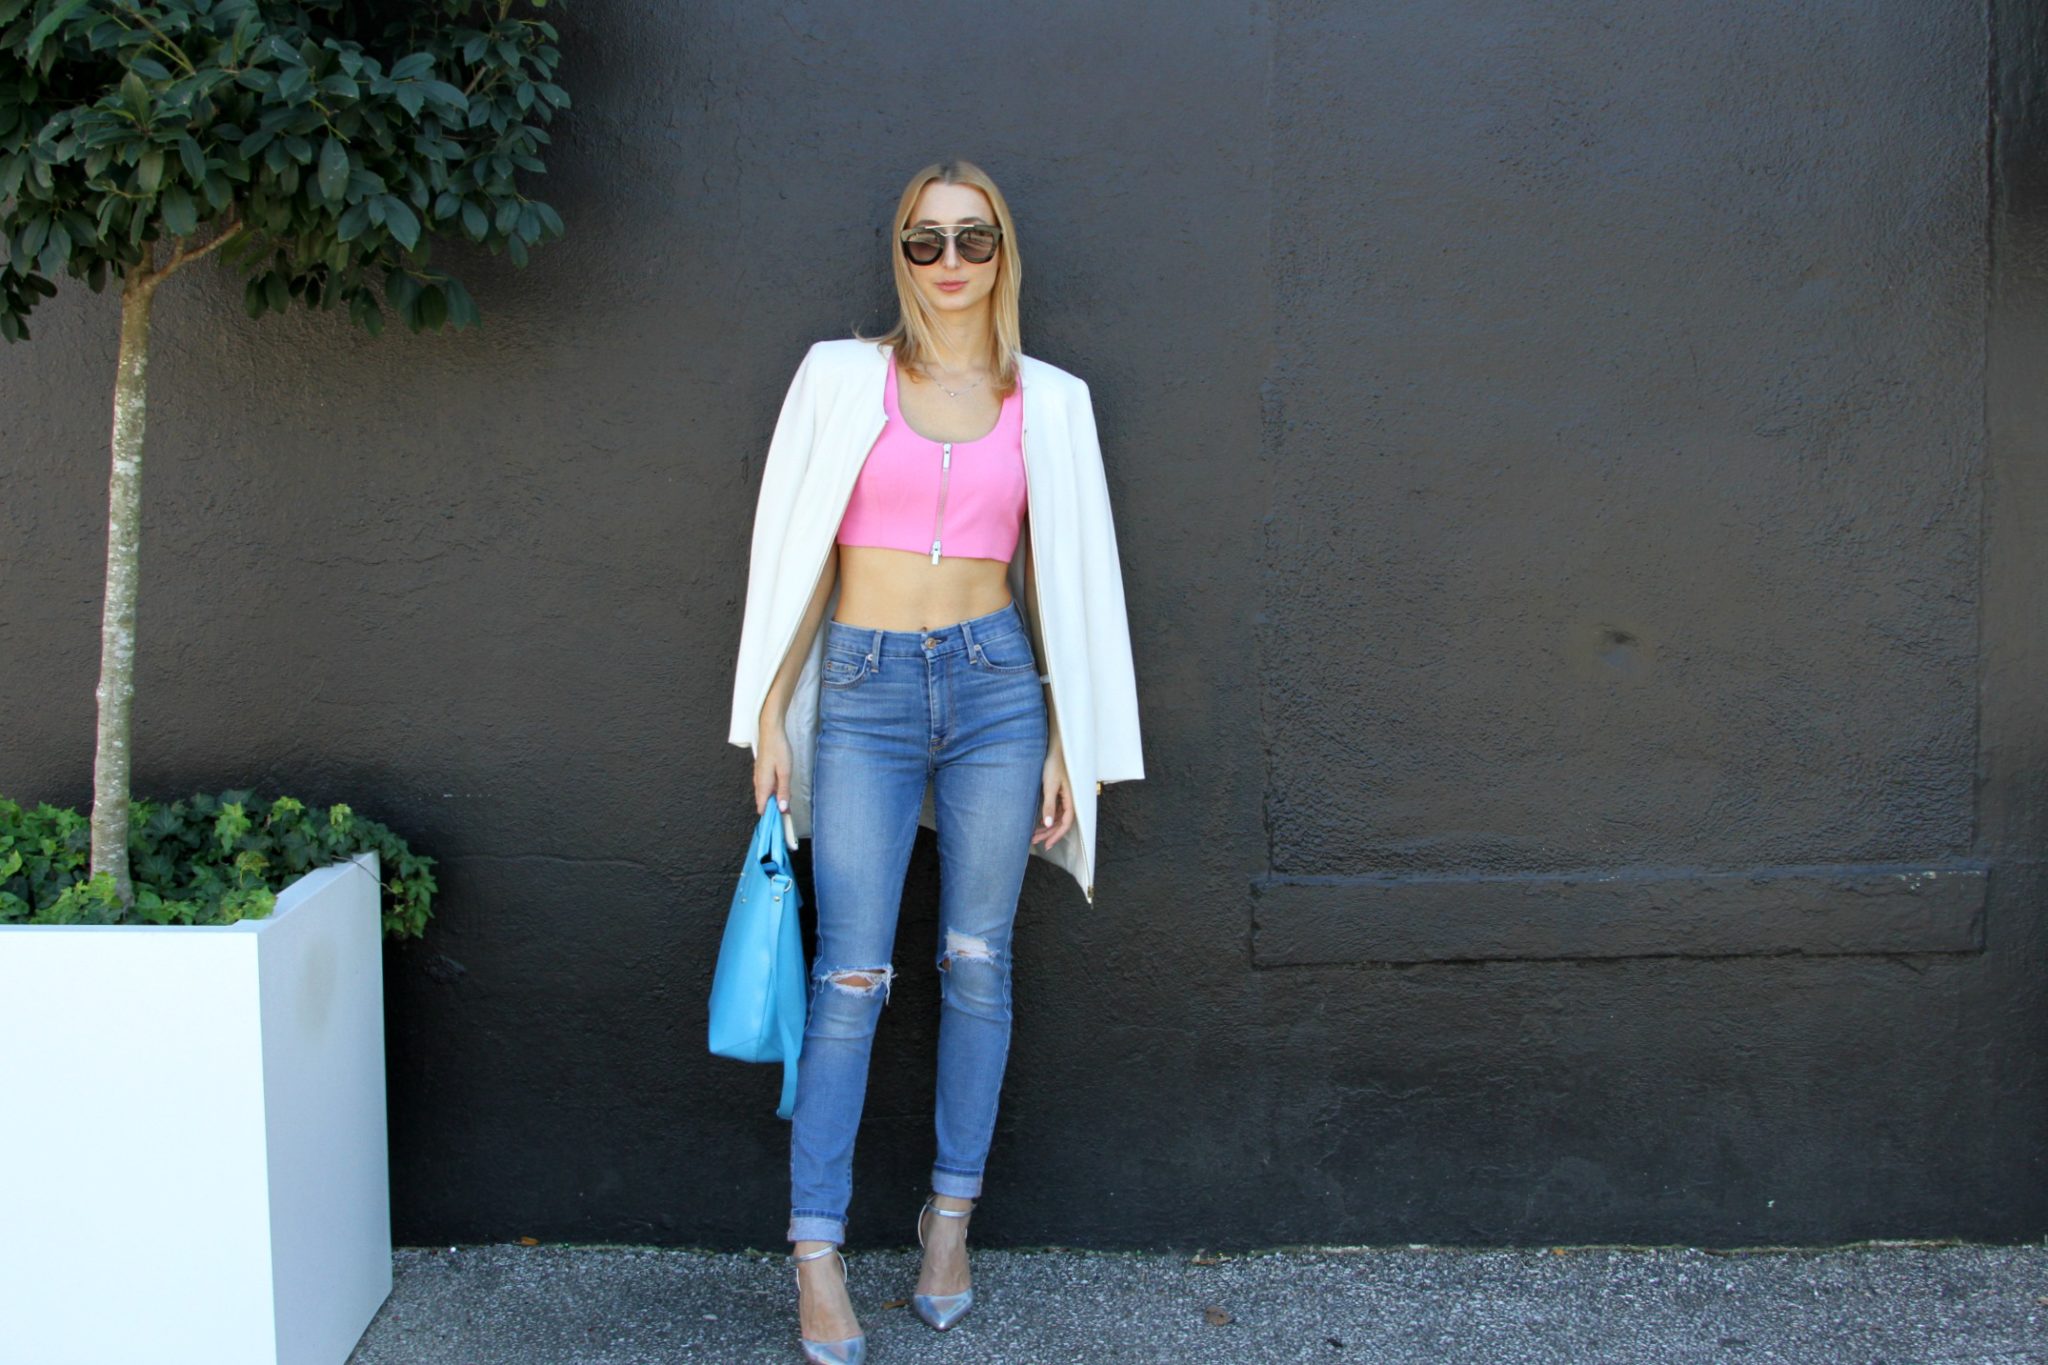 Wear a Crop Top Like the Fashion Girls + Win a Pair of Jeans from Fitcode!